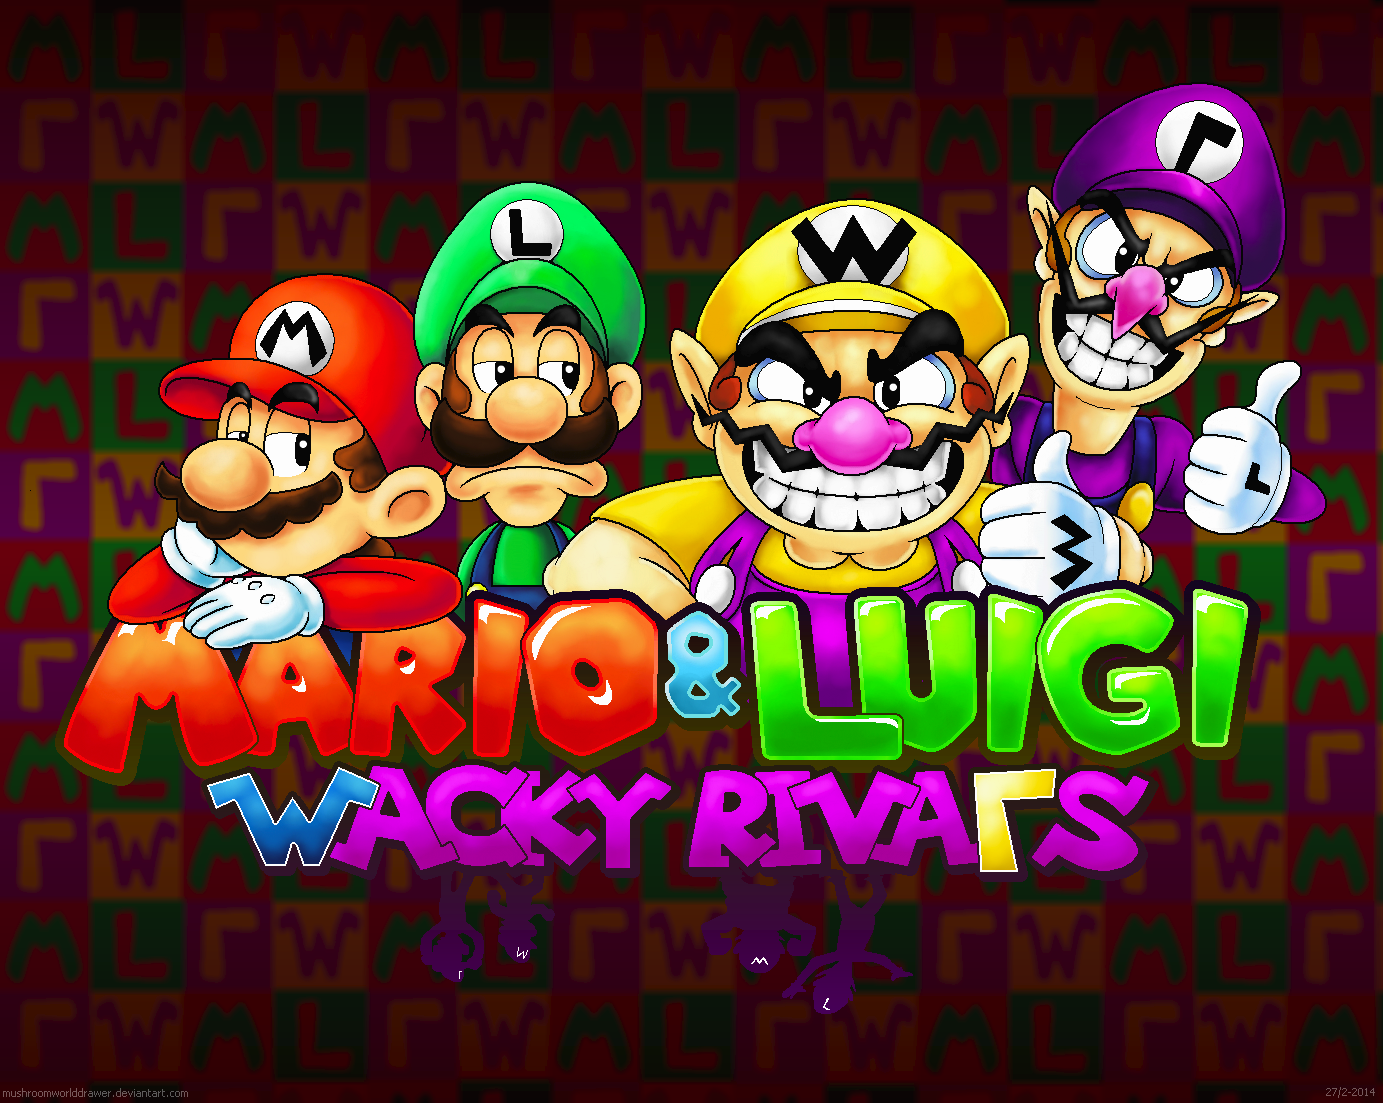 mario_and_luigi__wacky_rivals_by_mushroomworlddrawer-d788qpy.png